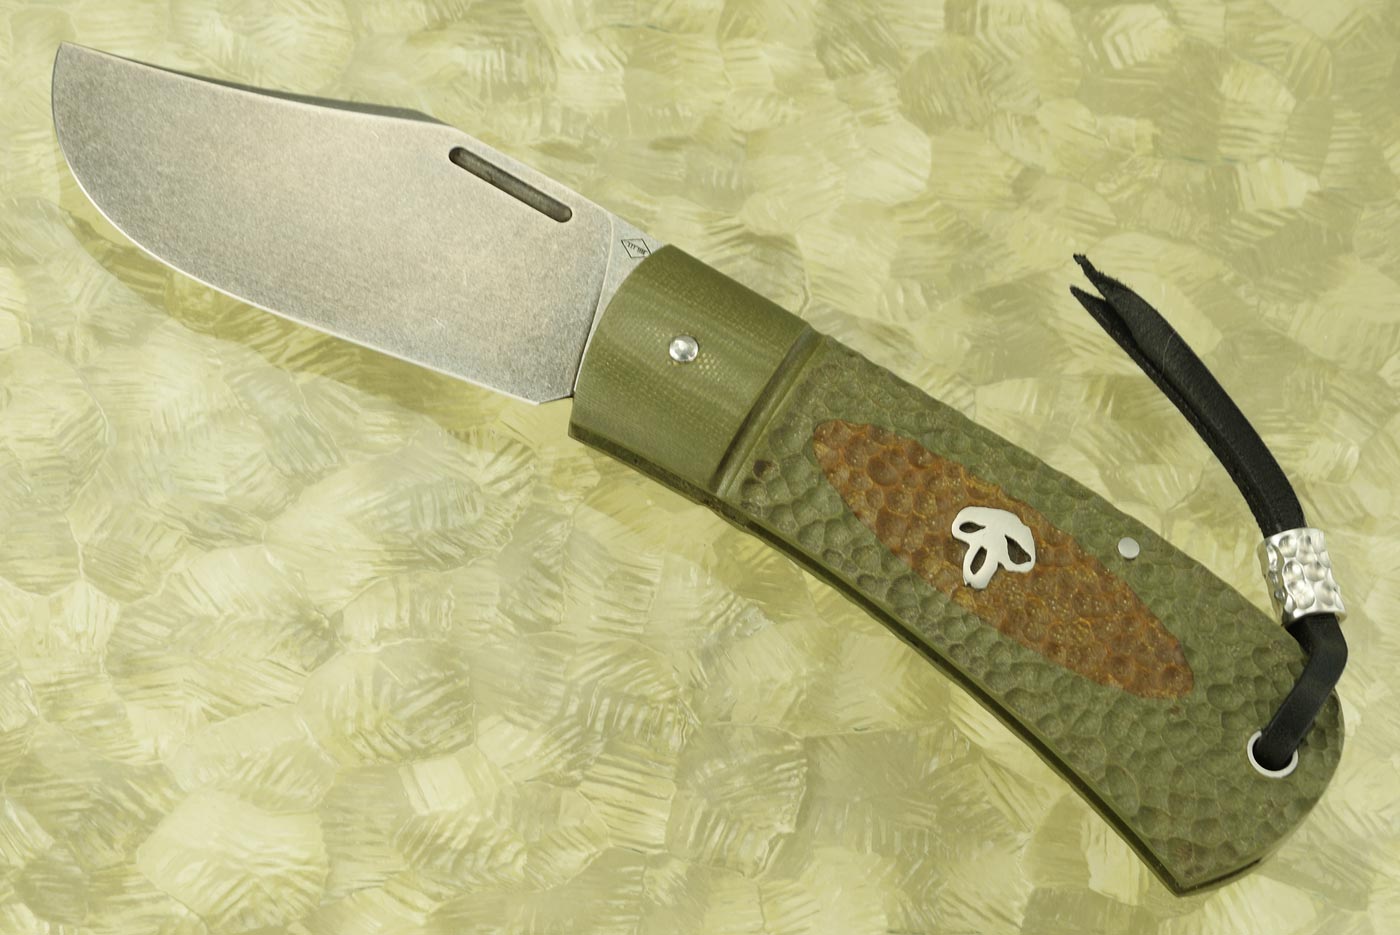 Bad Guy Slipjoint Folder with Green and Tan Jigged G10